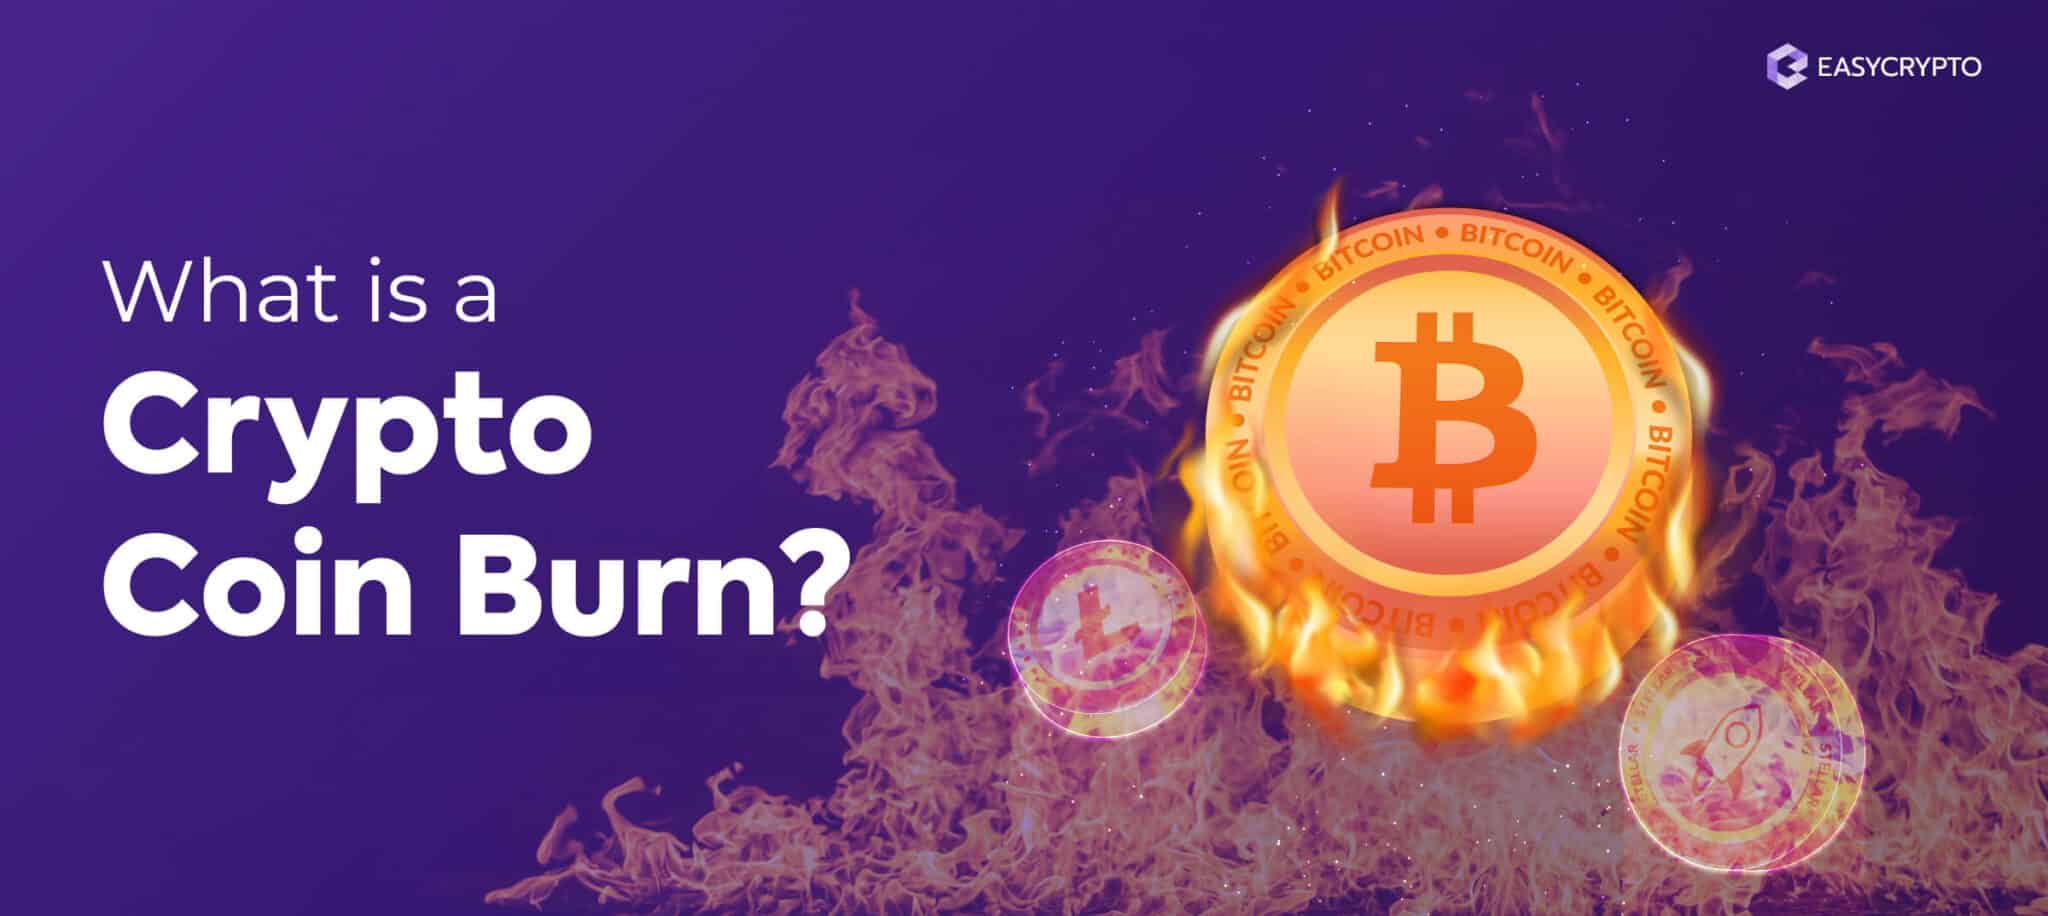 what is burning coins crypto